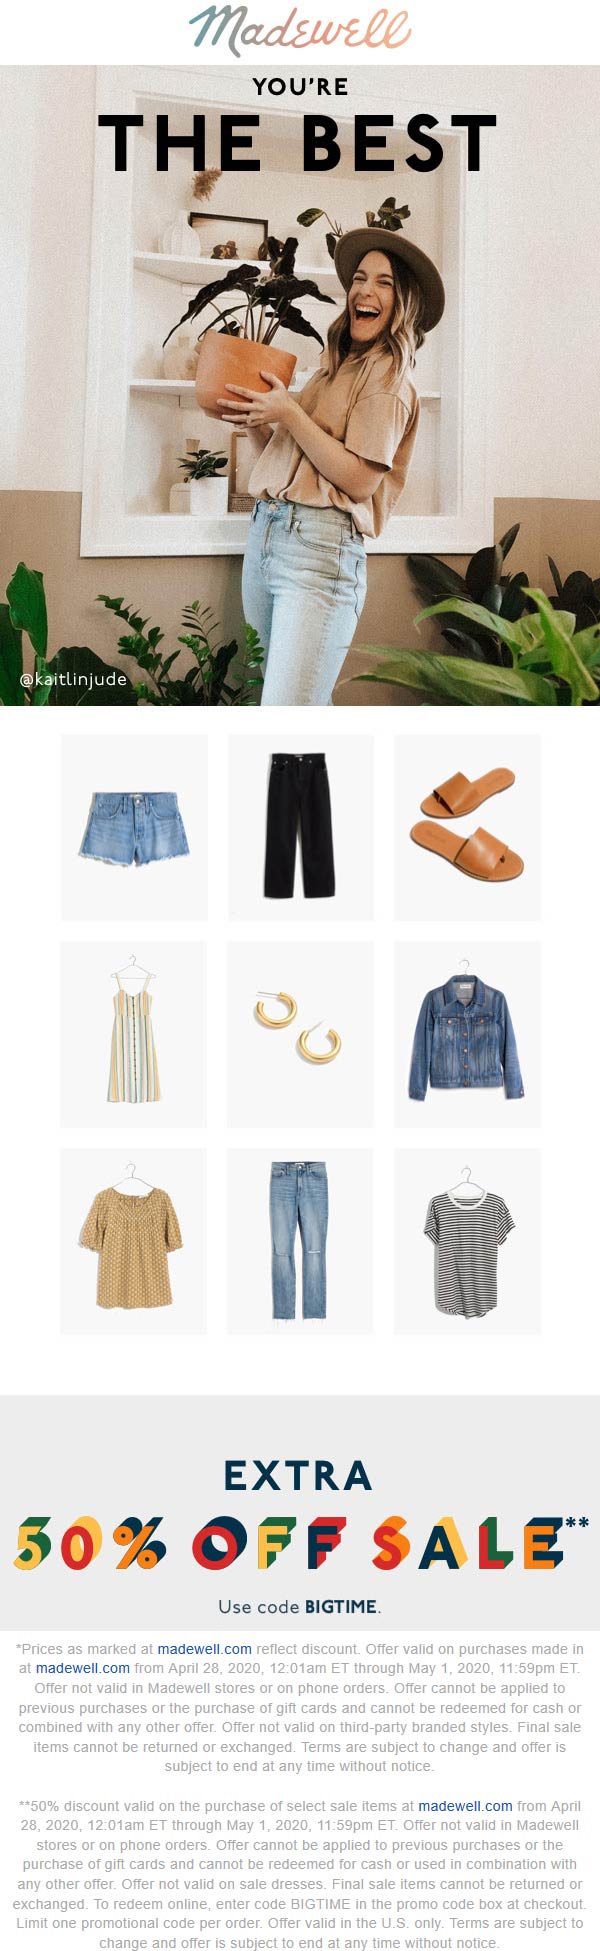 Madewell stores Coupon  Extra 50% off sale items at Madewell via promo code BIGTIME (05/01)